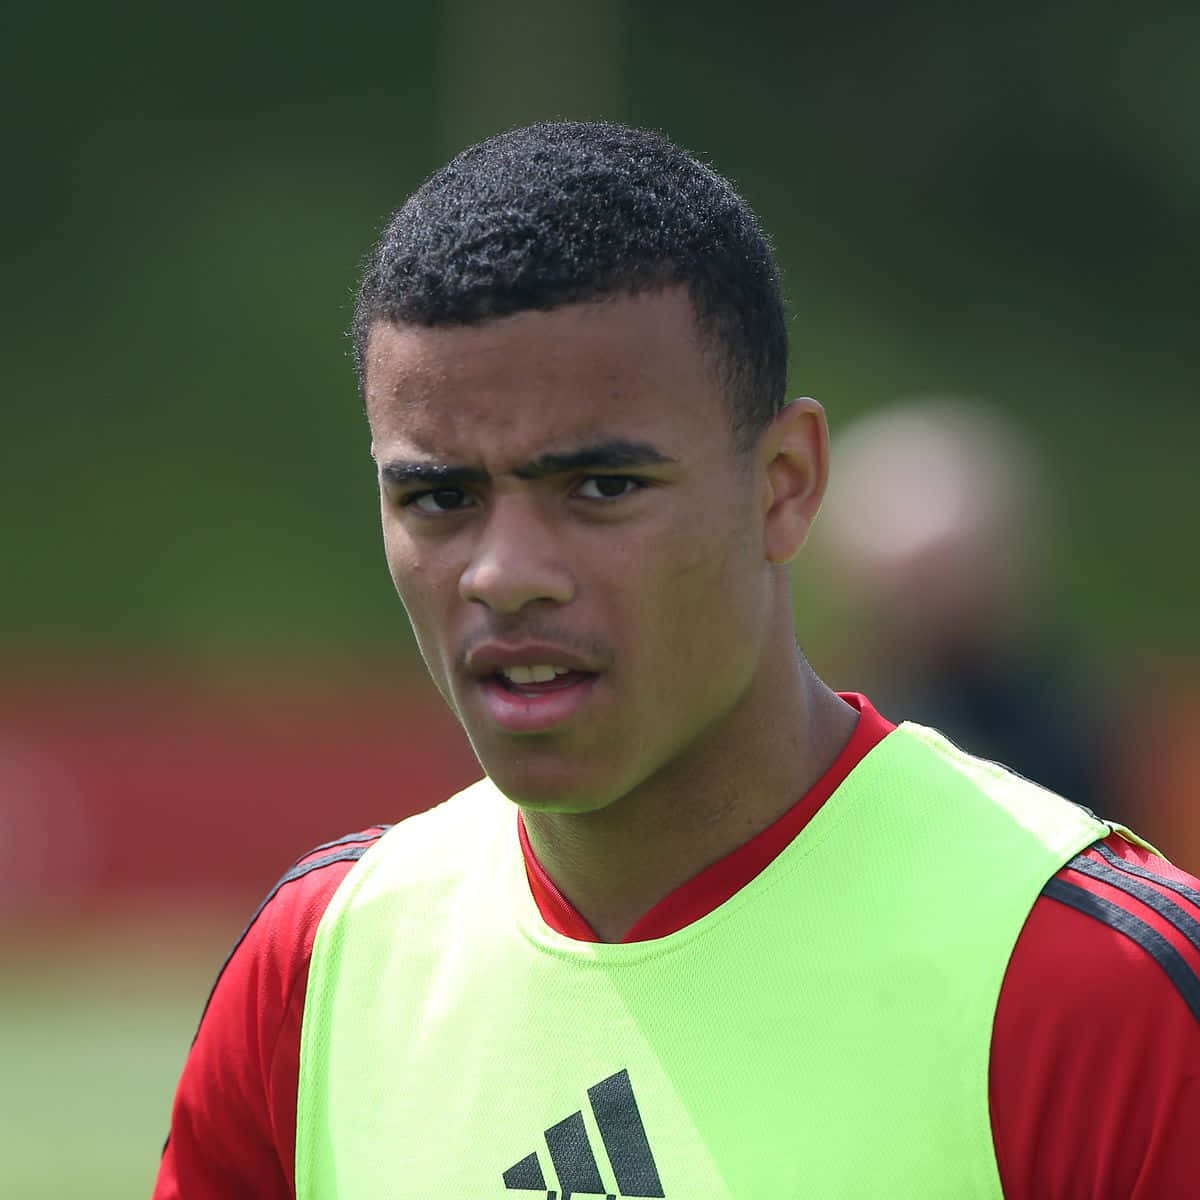 Mason Greenwood in action at a Manchester United match